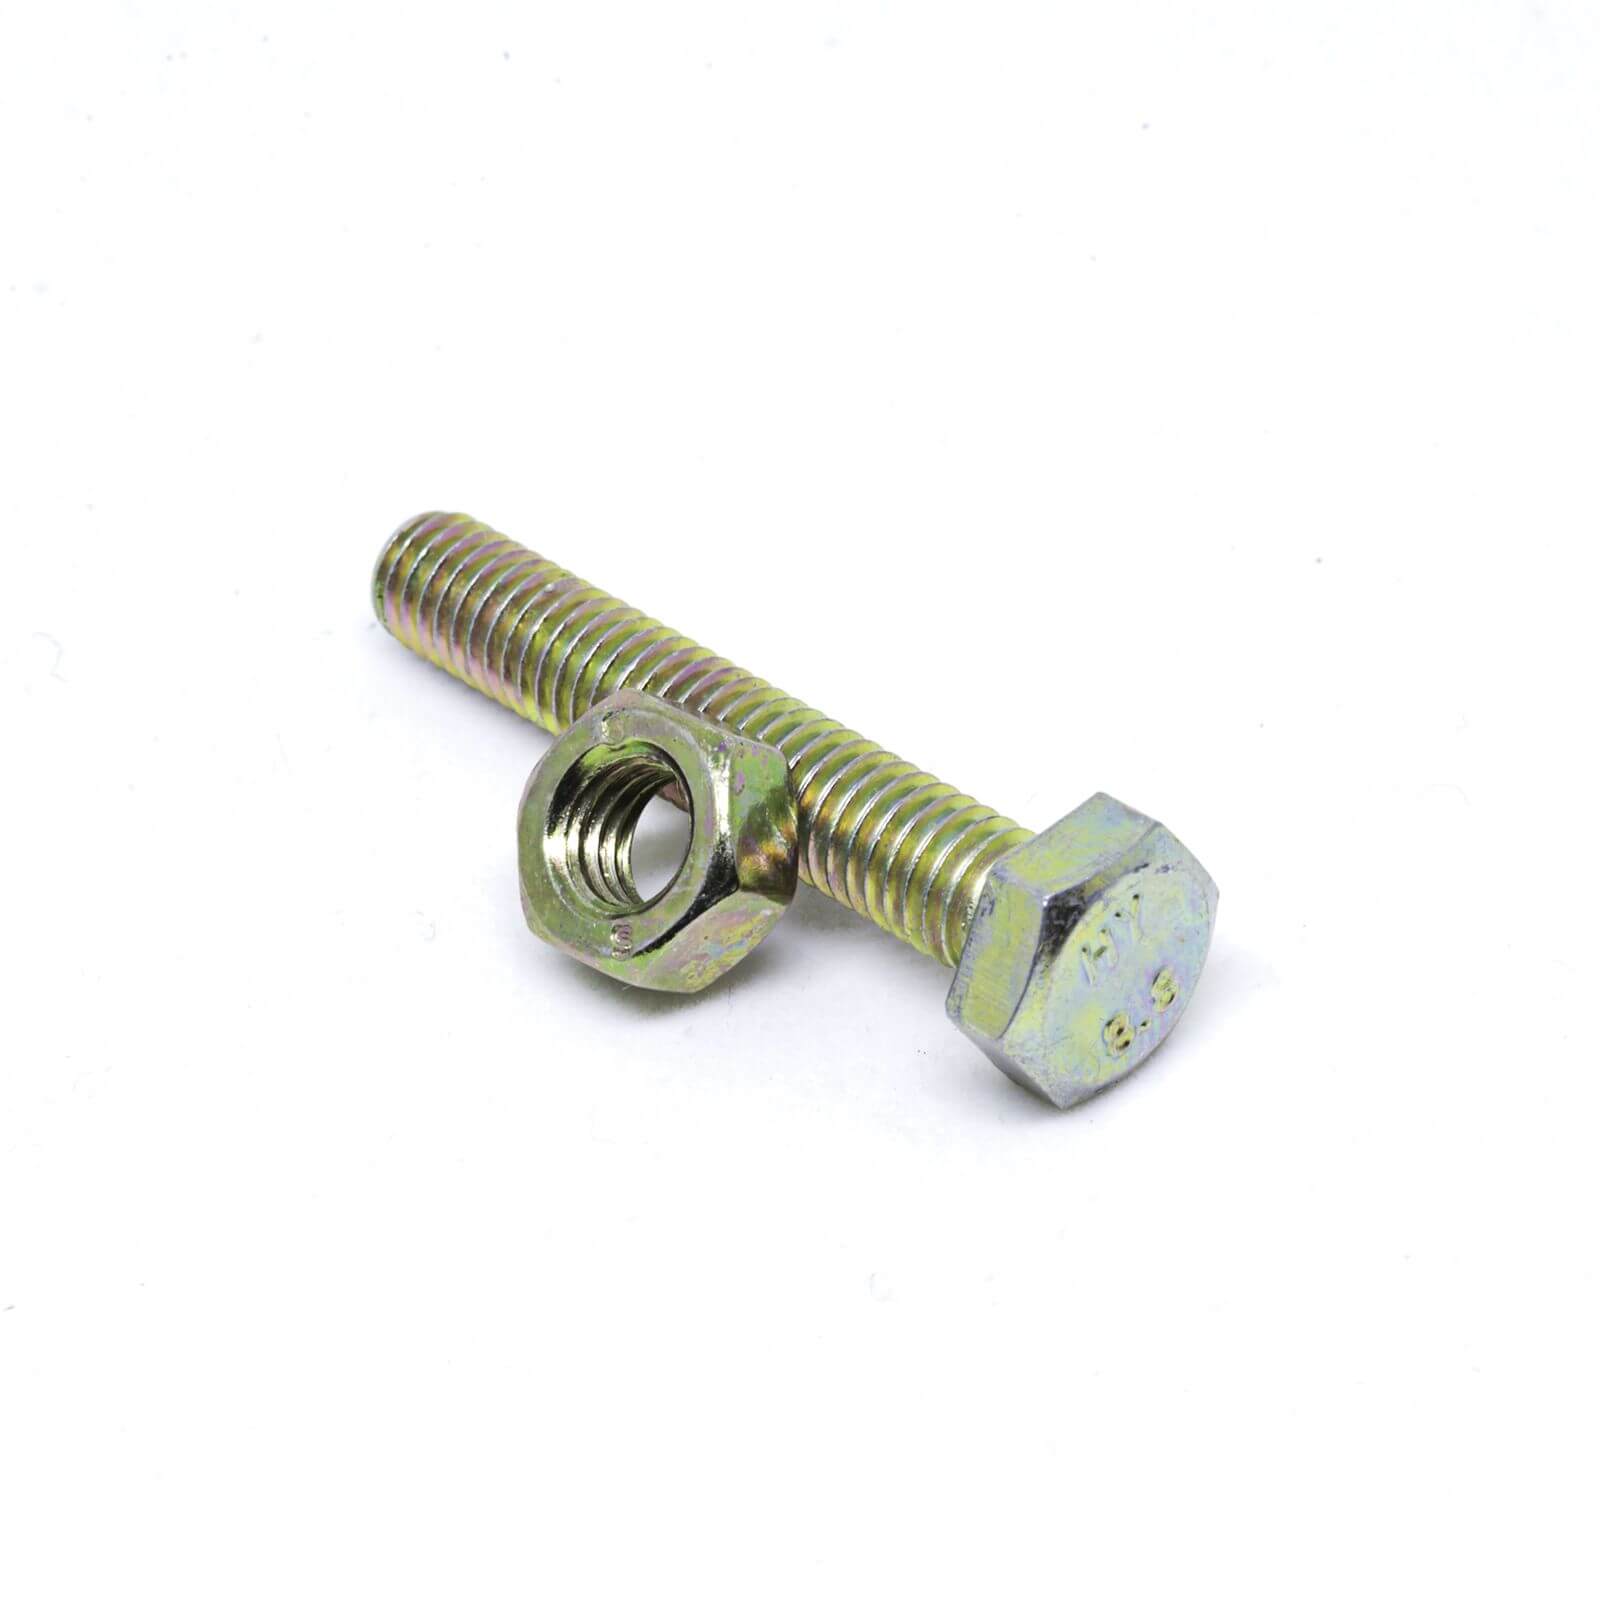 Pinnacle High Tensile Bolts and Nuts - 6 x 50mm - 3 Pack